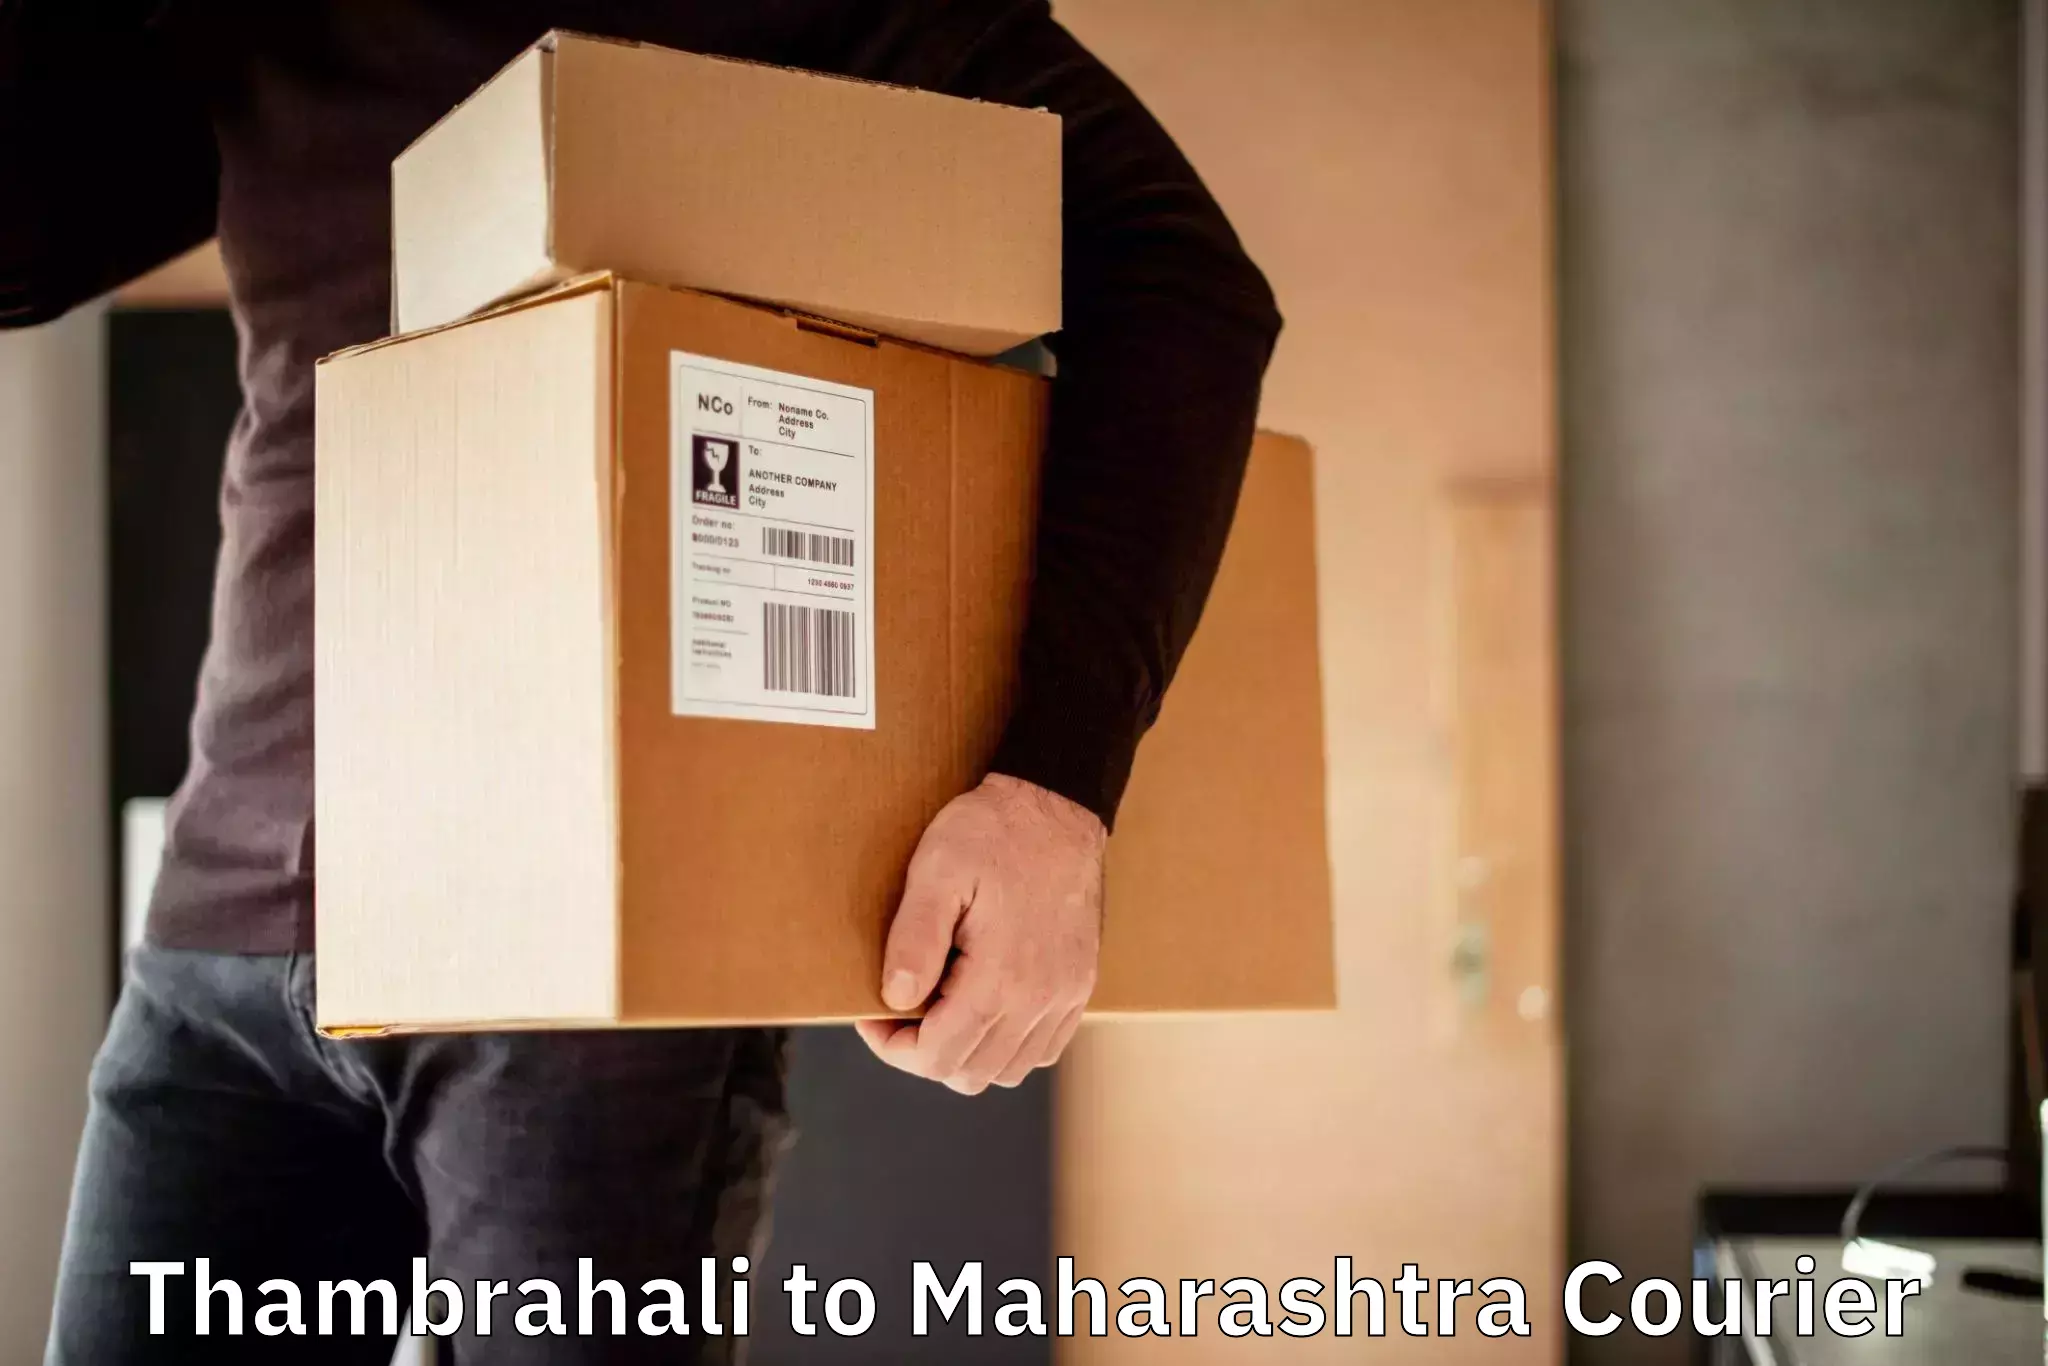 Courier dispatch services Thambrahali to Shrivardhan